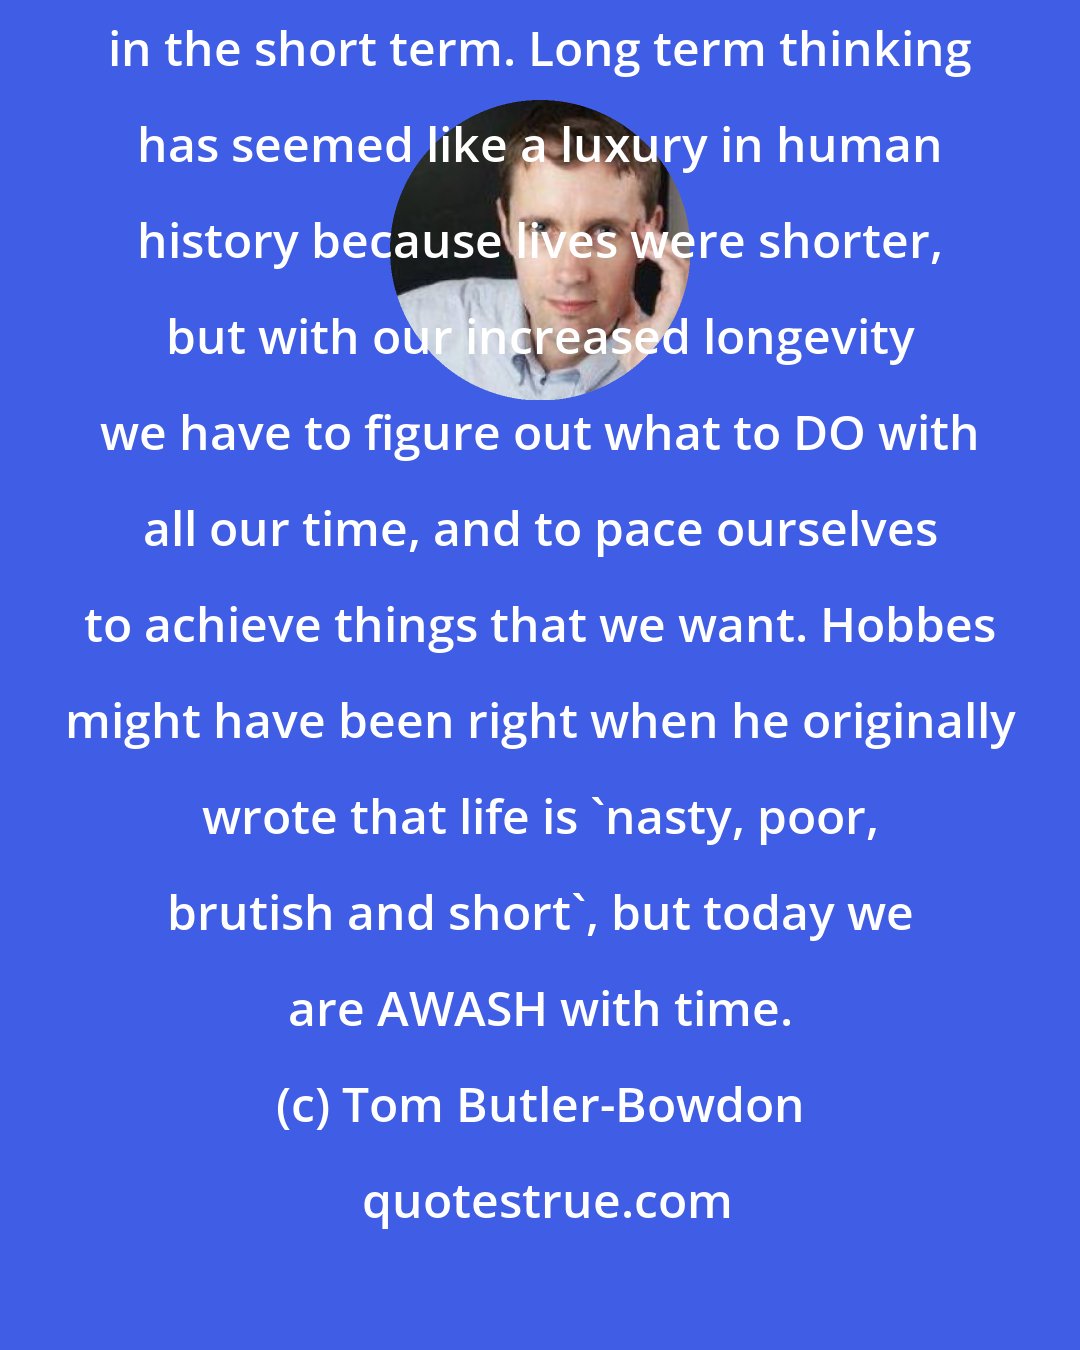 Tom Butler-Bowdon: We want everything in a hurry because our primary aim must be survival in the short term. Long term thinking has seemed like a luxury in human history because lives were shorter, but with our increased longevity we have to figure out what to DO with all our time, and to pace ourselves to achieve things that we want. Hobbes might have been right when he originally wrote that life is 'nasty, poor, brutish and short', but today we are AWASH with time.